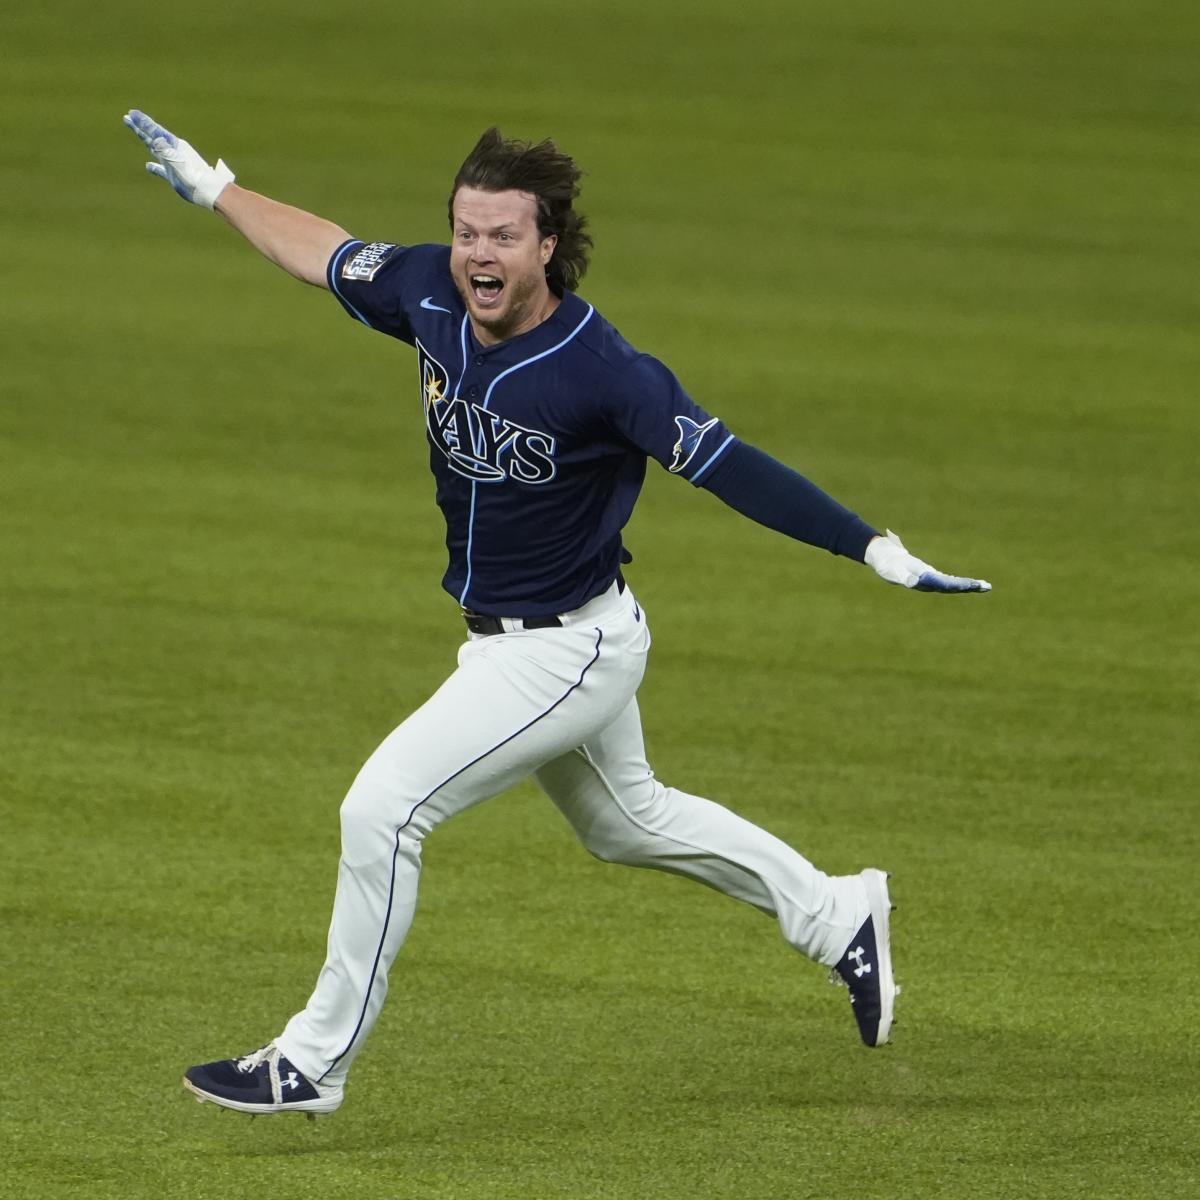 Brett Phillips' Walk-Off Hit Gives Rays Dramatic Game 4 Win vs. Dodgers, News, Scores, Highlights, Stats, and Rumors